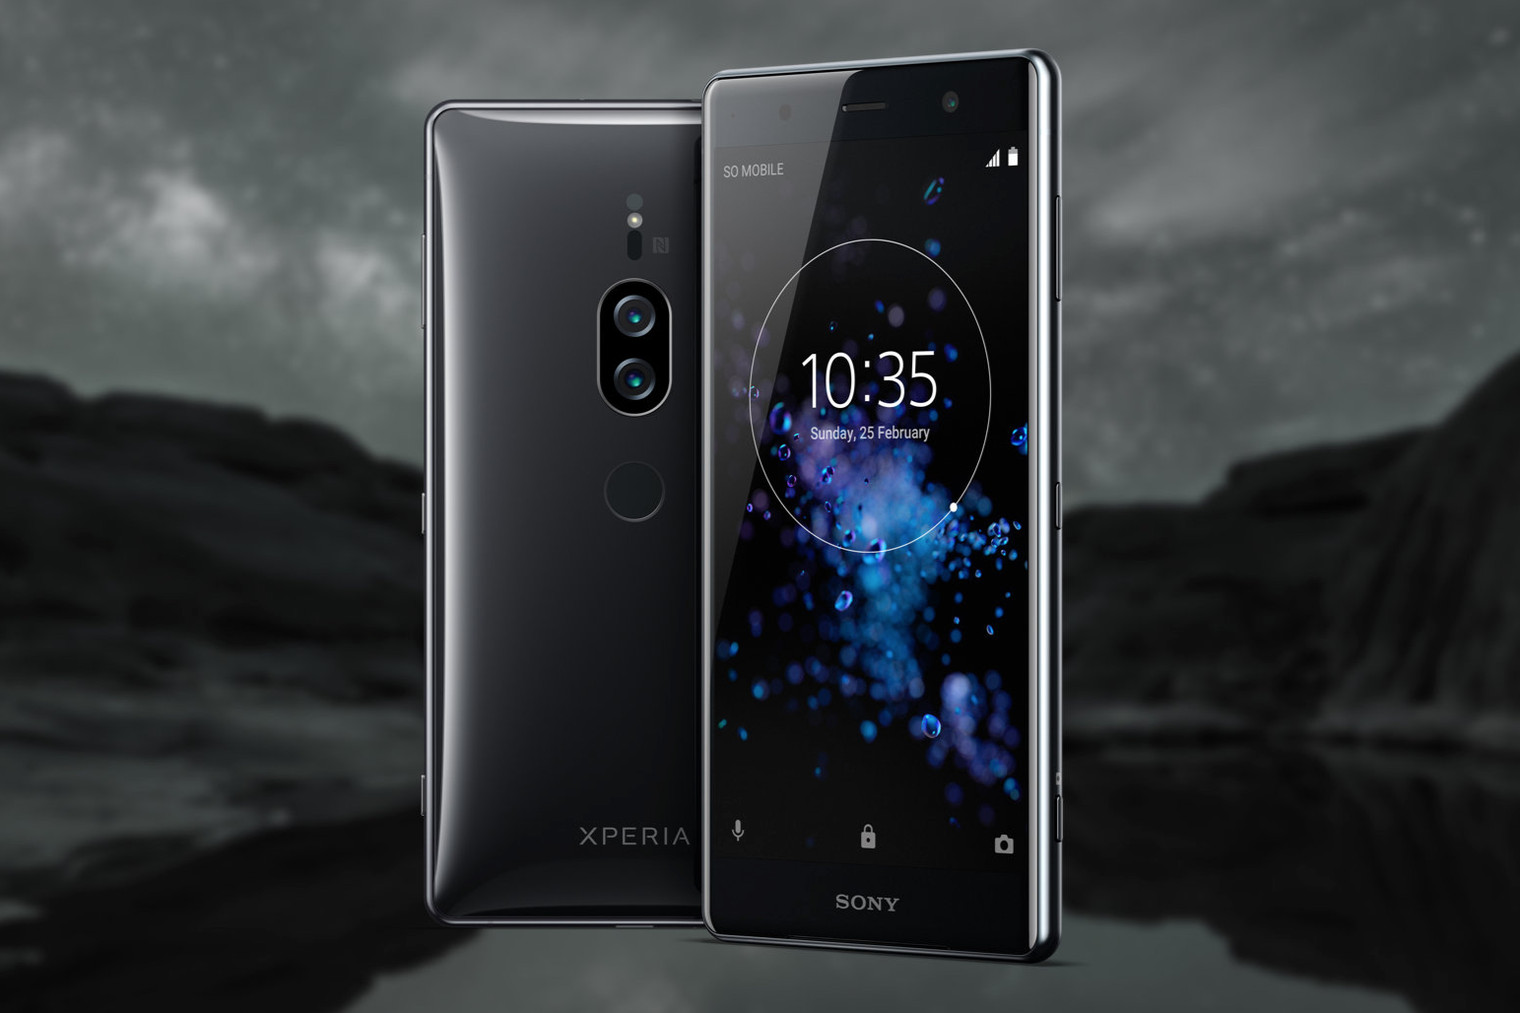 Sony XZ2 Premium official with 4K display, dual rear cameras